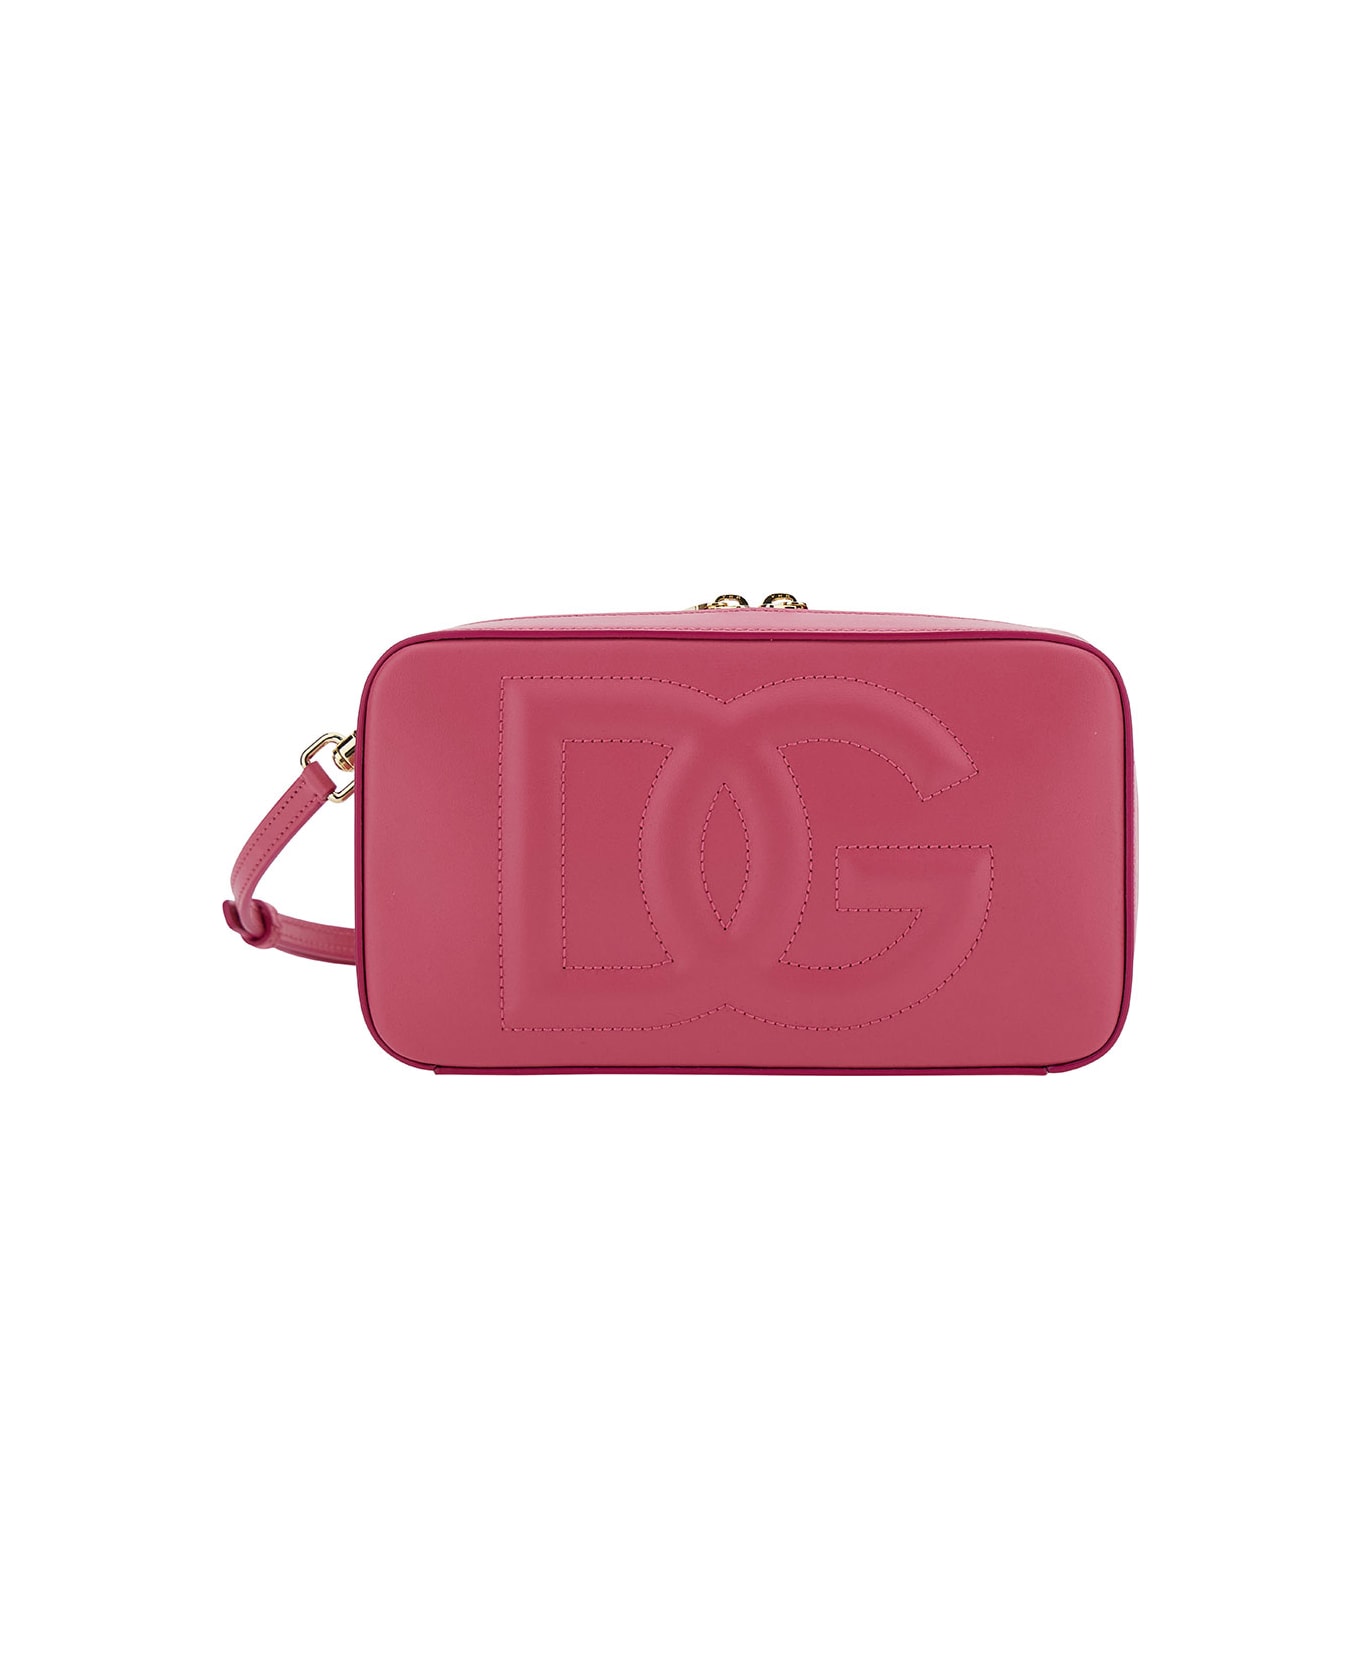 Dolce & Gabbana Pink Shoulder Bag With Quilted Dg Logo In Leather Woman - Pink